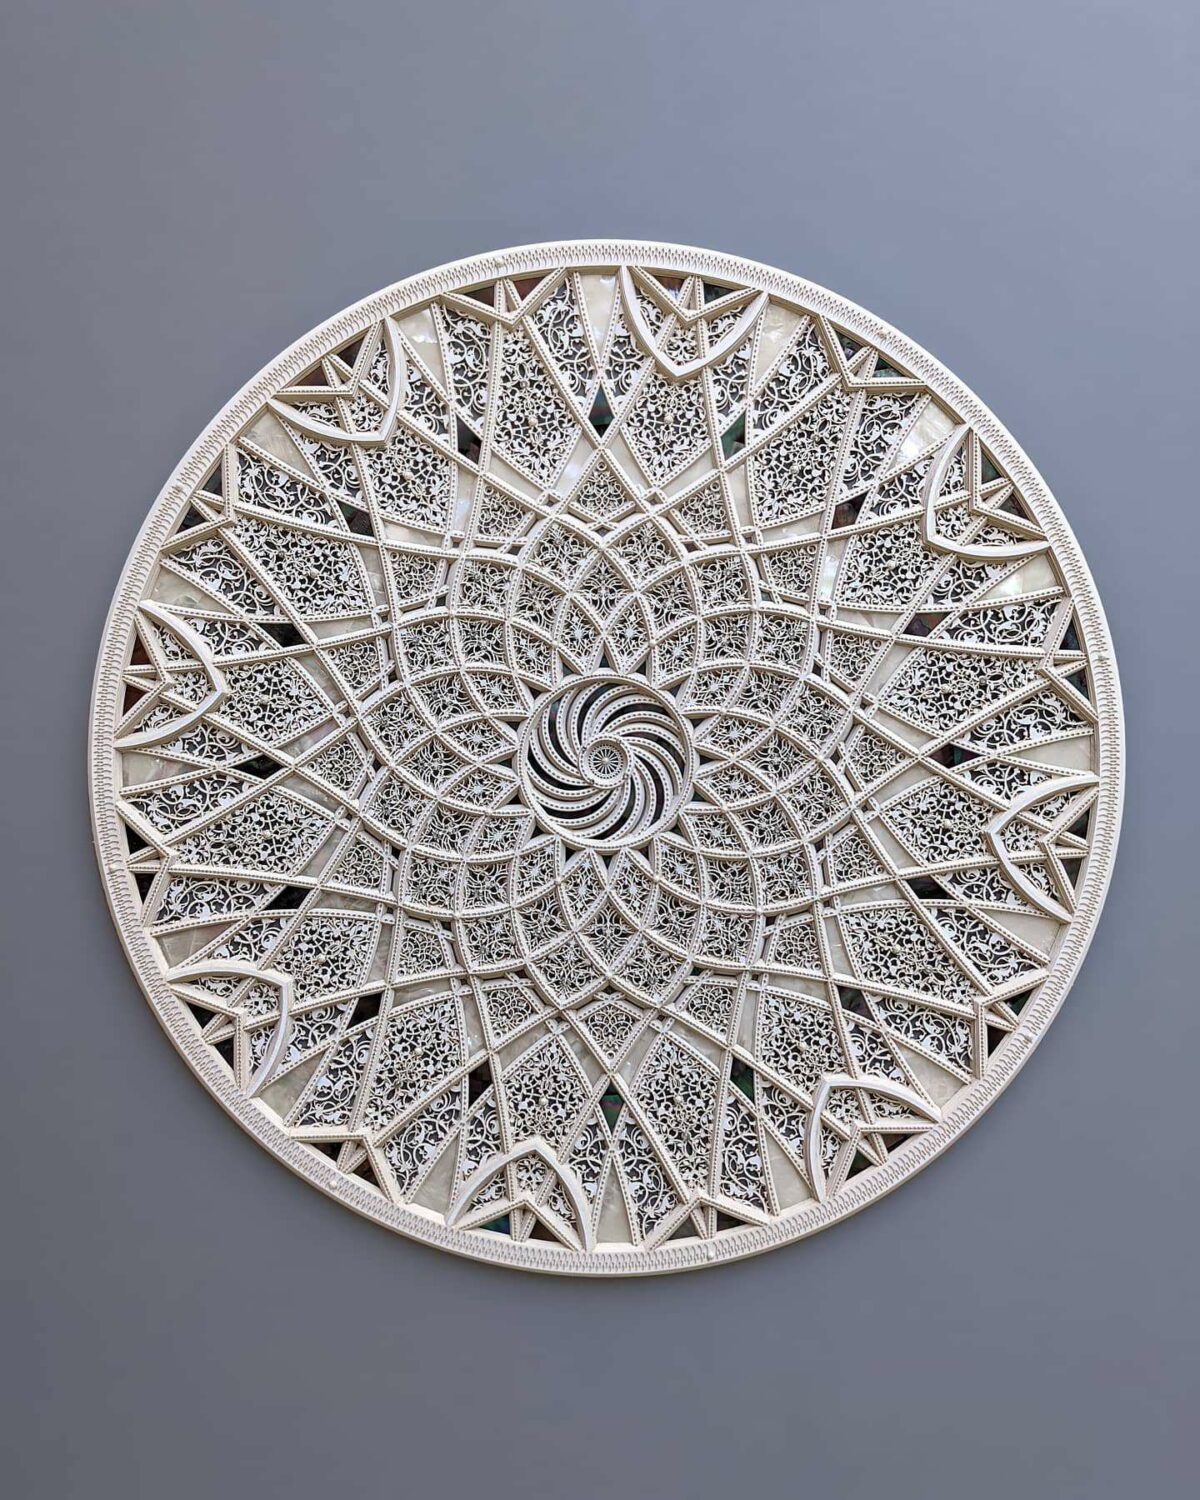 Intricate And Colorful Arabesque Made Of Laser Cut Paper Julia Ibbini 6